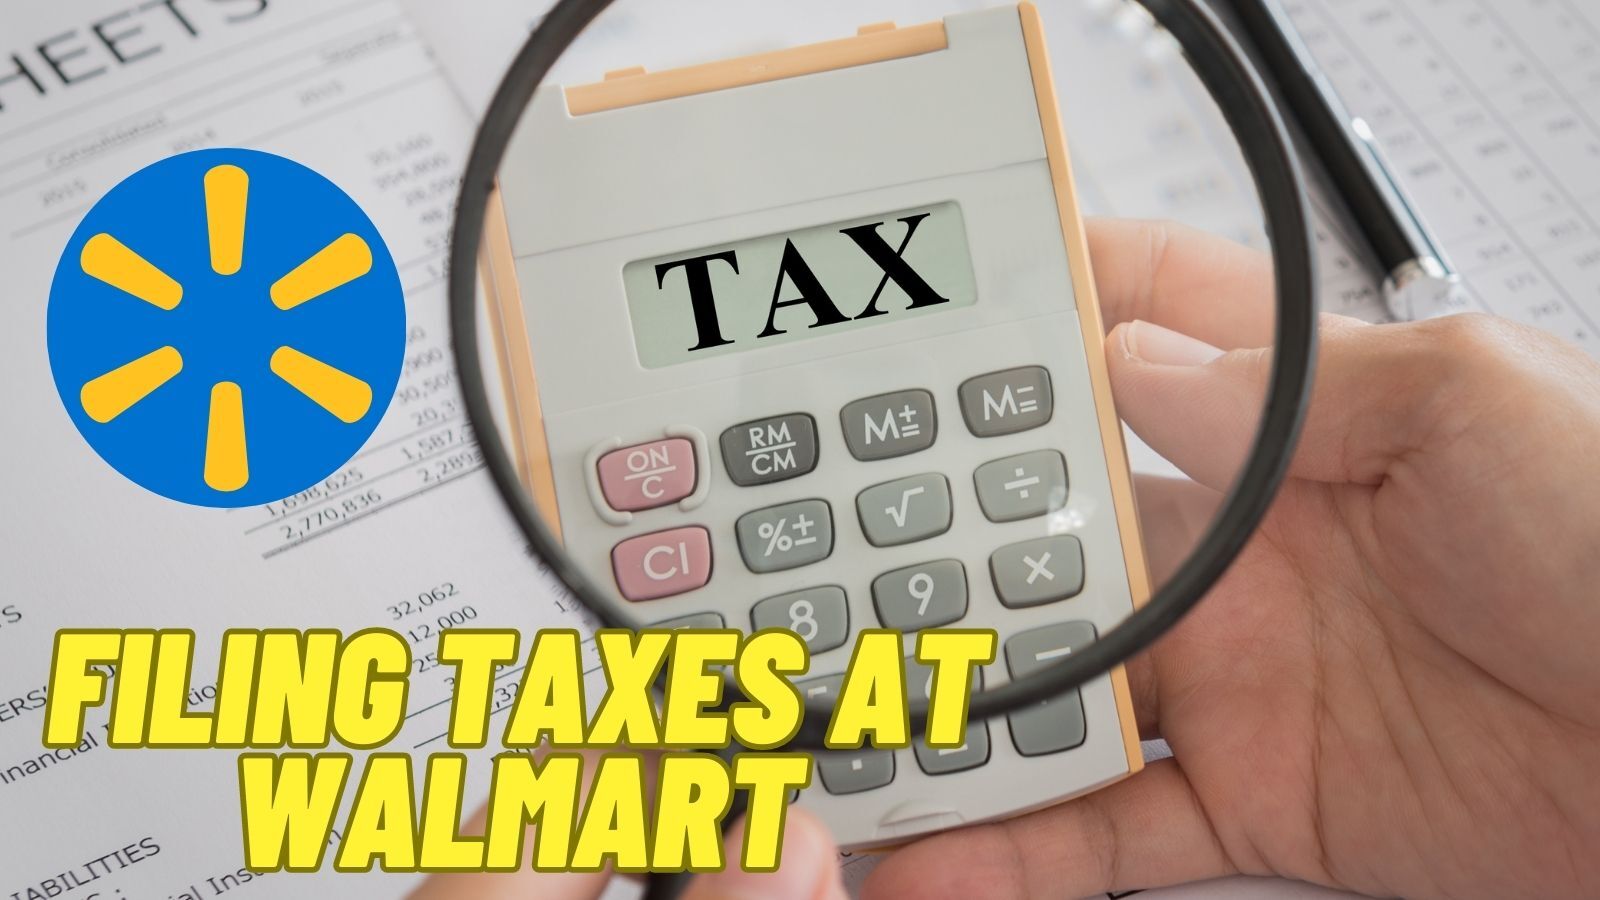 Filing Taxes at Walmart: How to Do That?